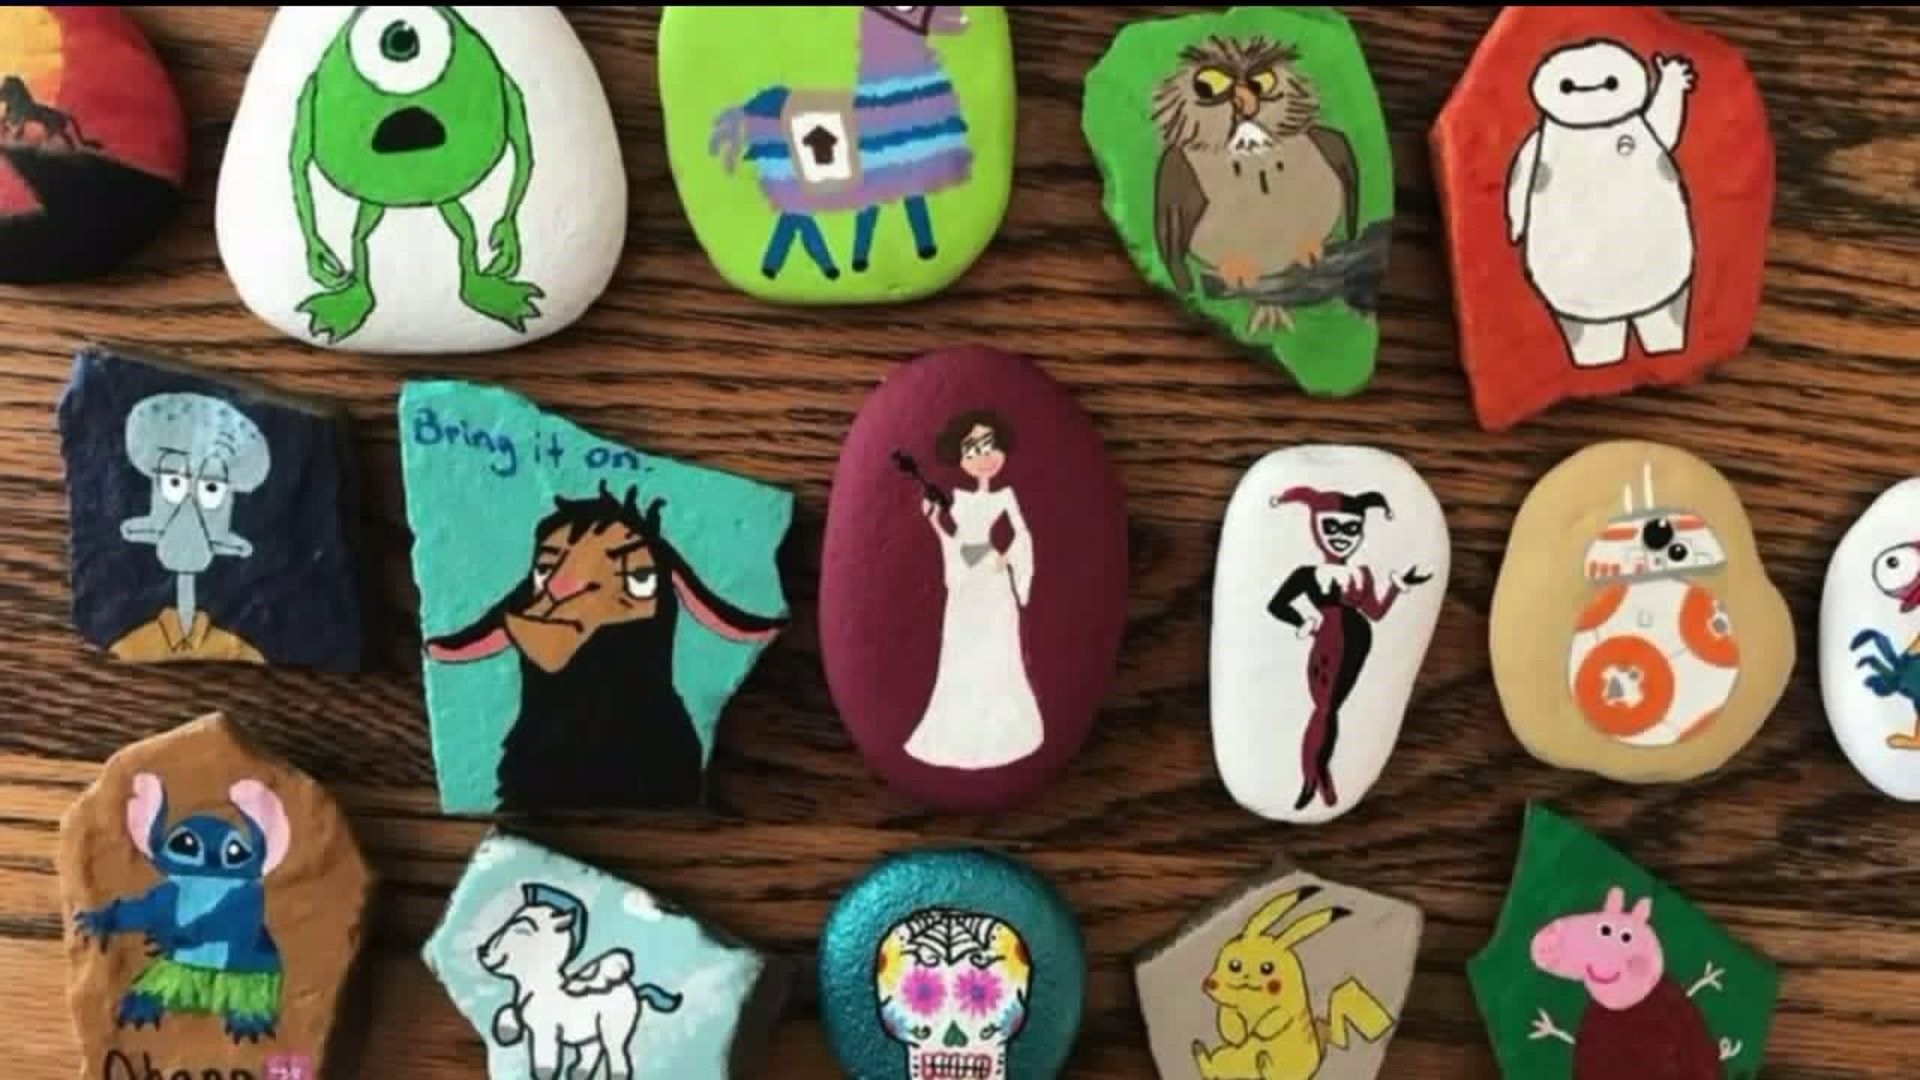 'Wilpo Rocks' Spreading Fun, Inspiring Messages on Painted Rocks